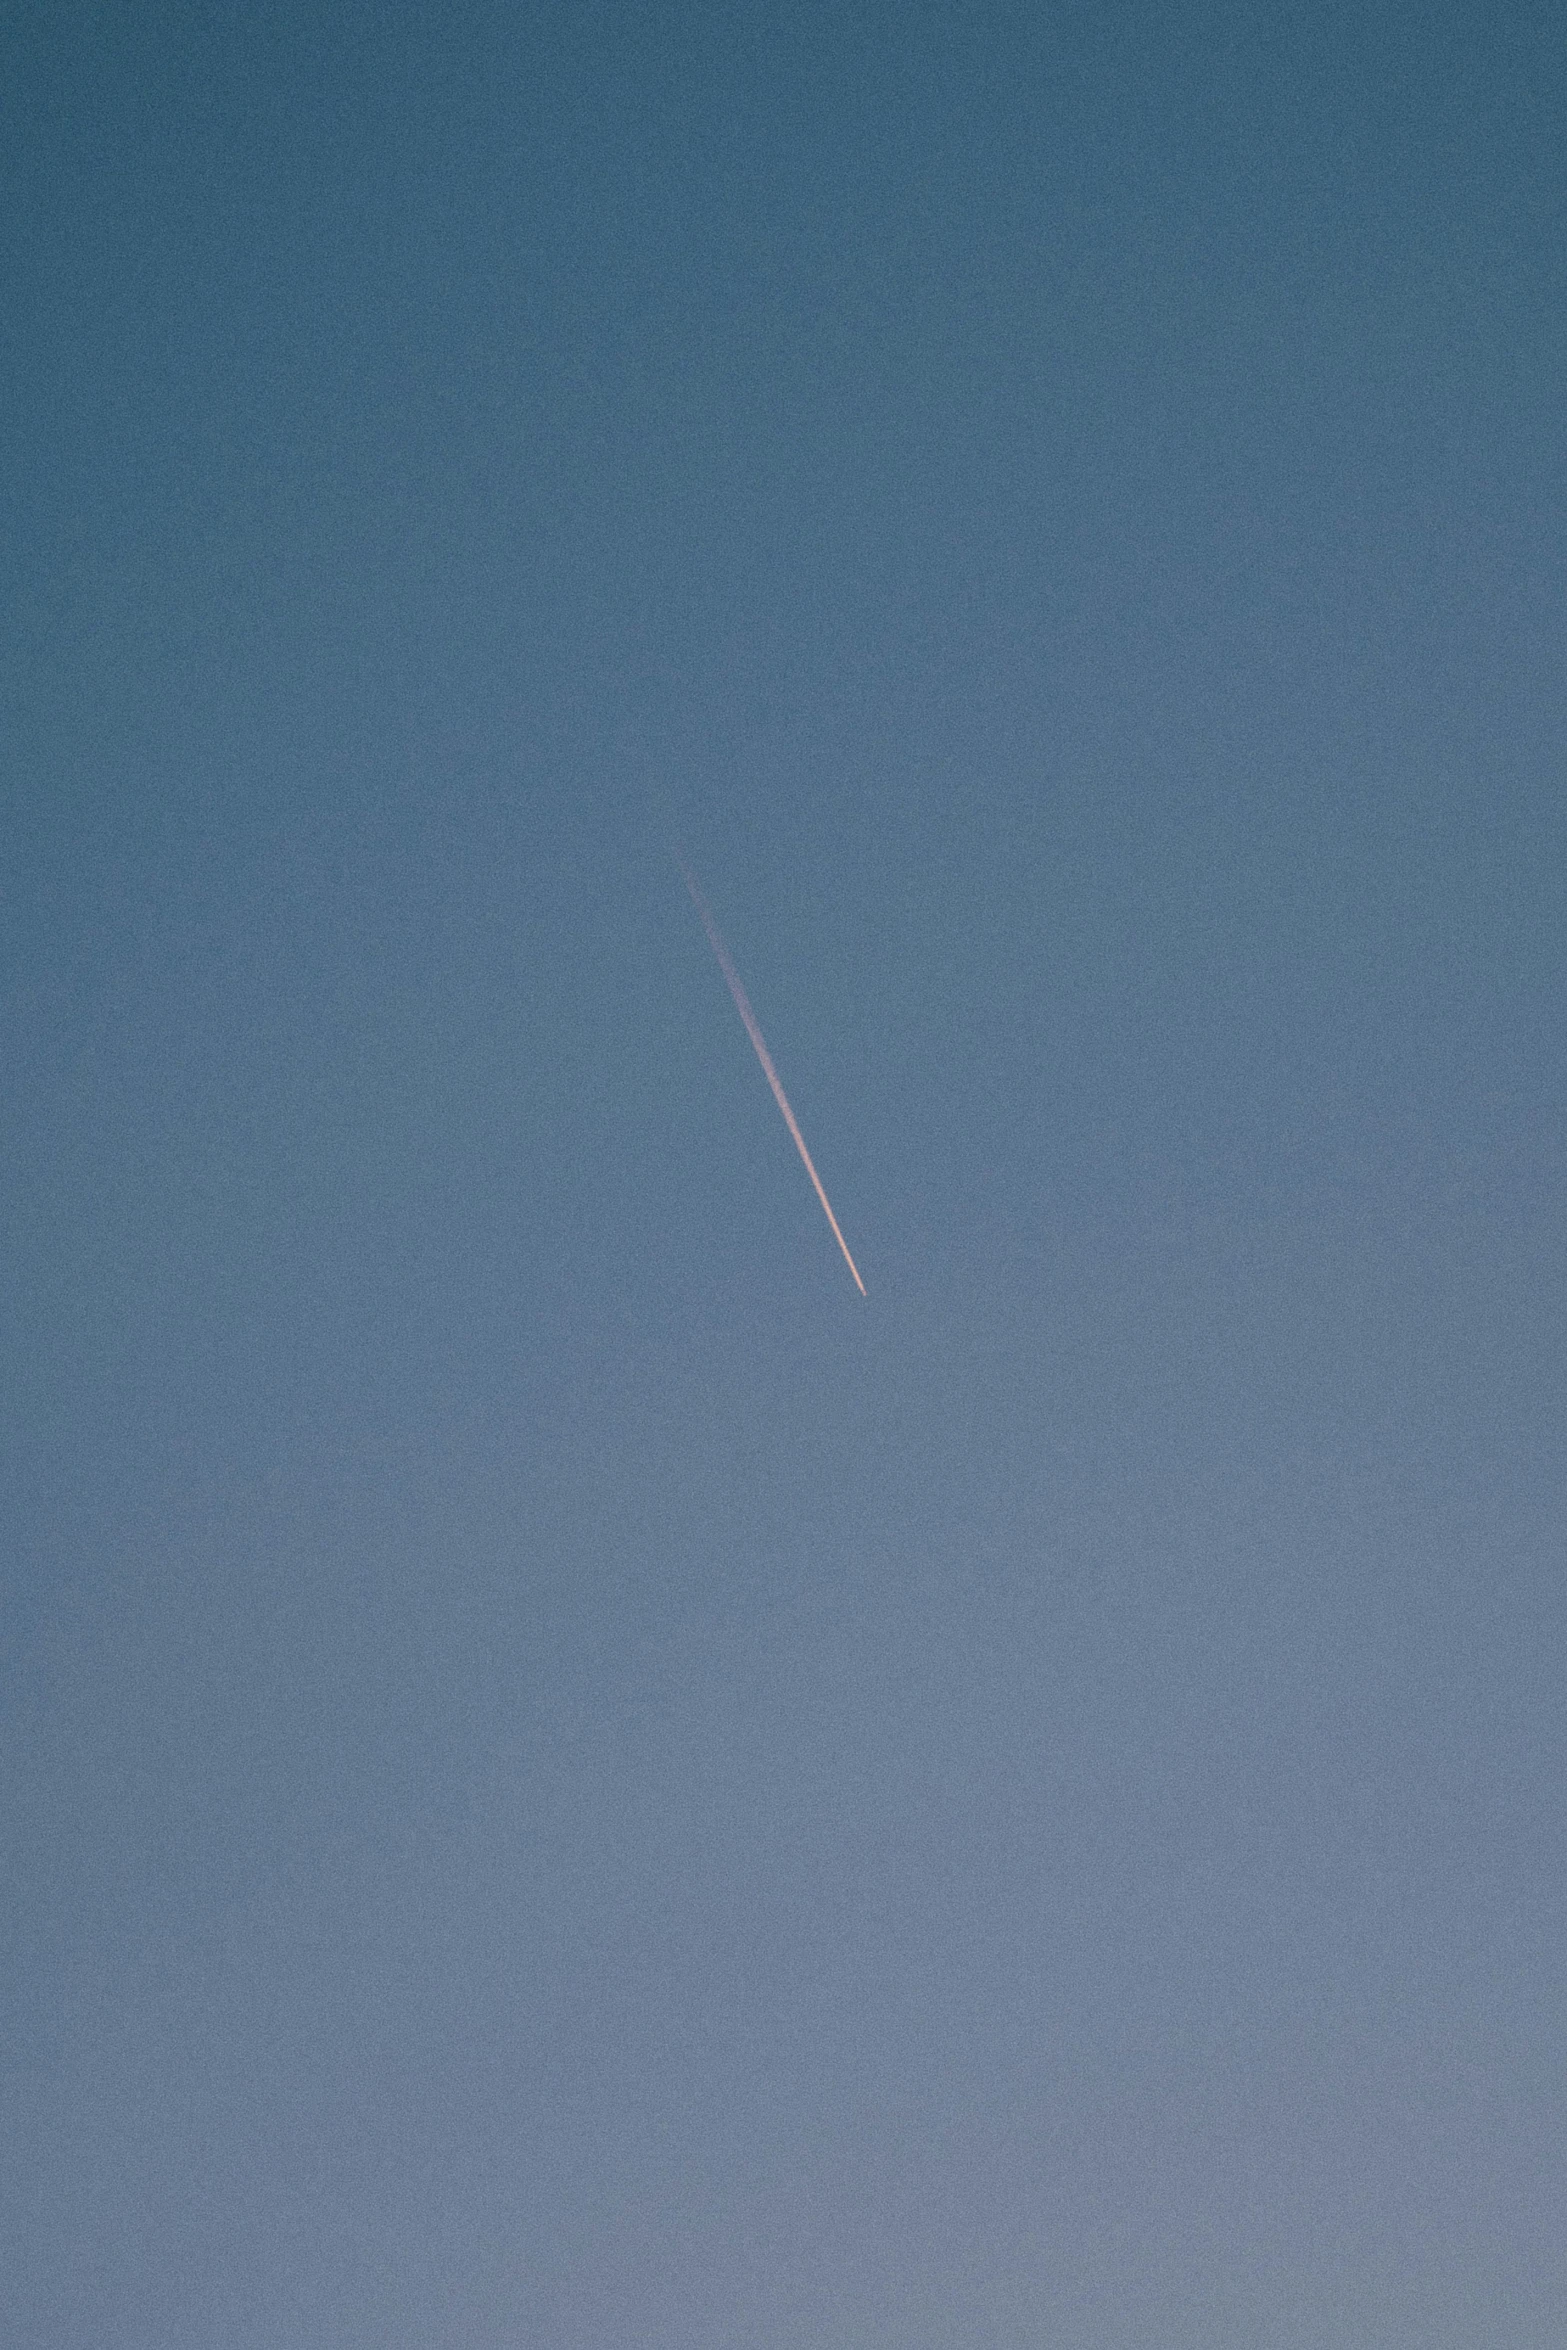 two planes that are flying in the sky